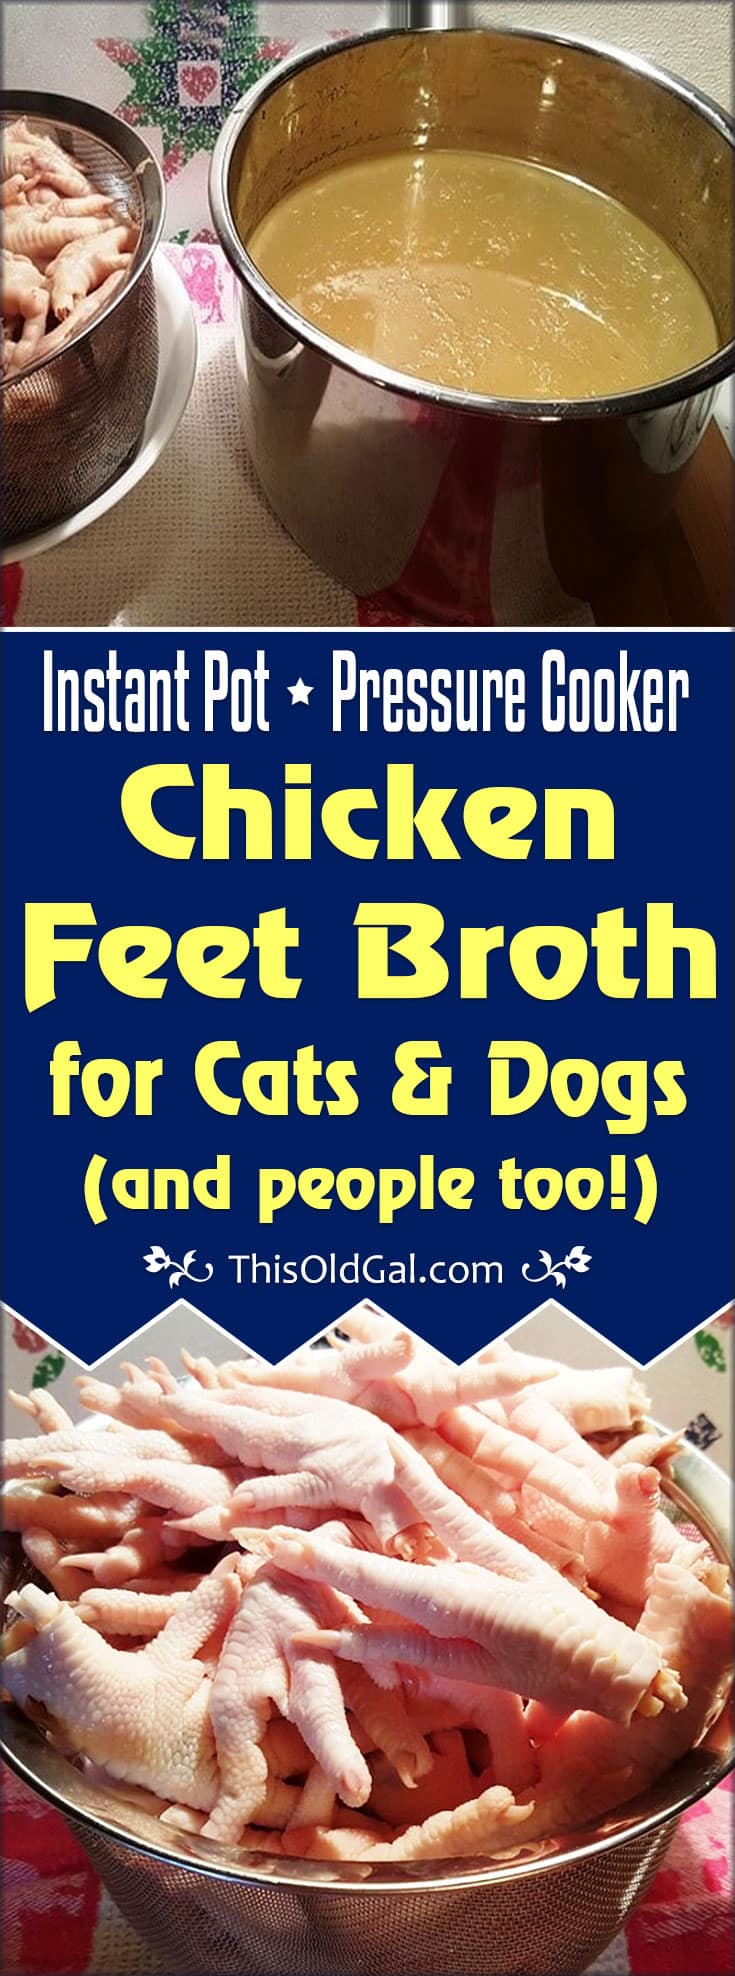 Pressure Cooker Chicken Feet Broth for Cats & Dogs (and people too!)